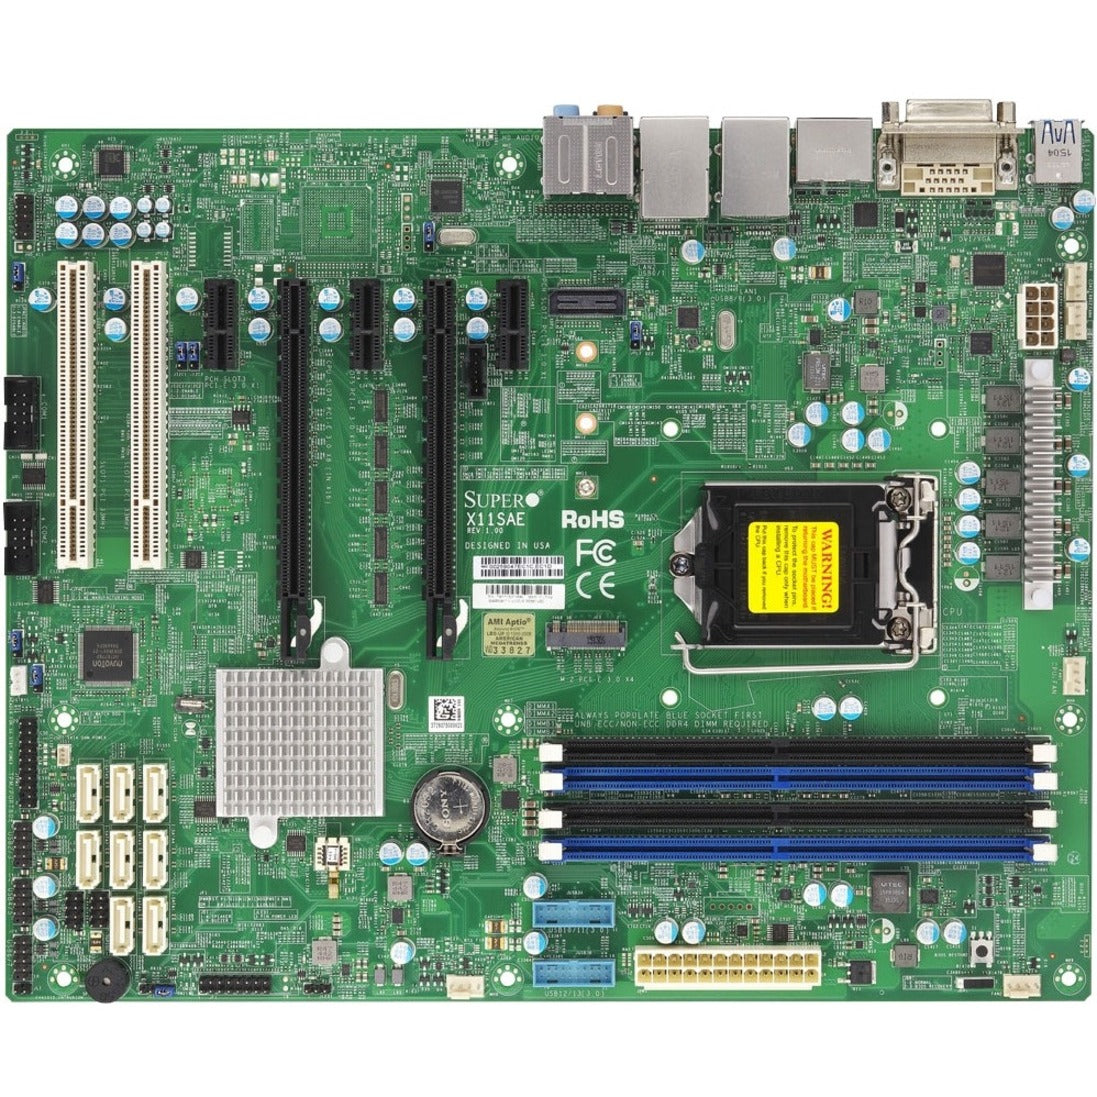 Supermicro MBD-X11SAE-B X11SAE Workstation Motherboard, Intel C236 Chipset, Core i7/i3/i5/Xeon Supported, ATX Form Factor